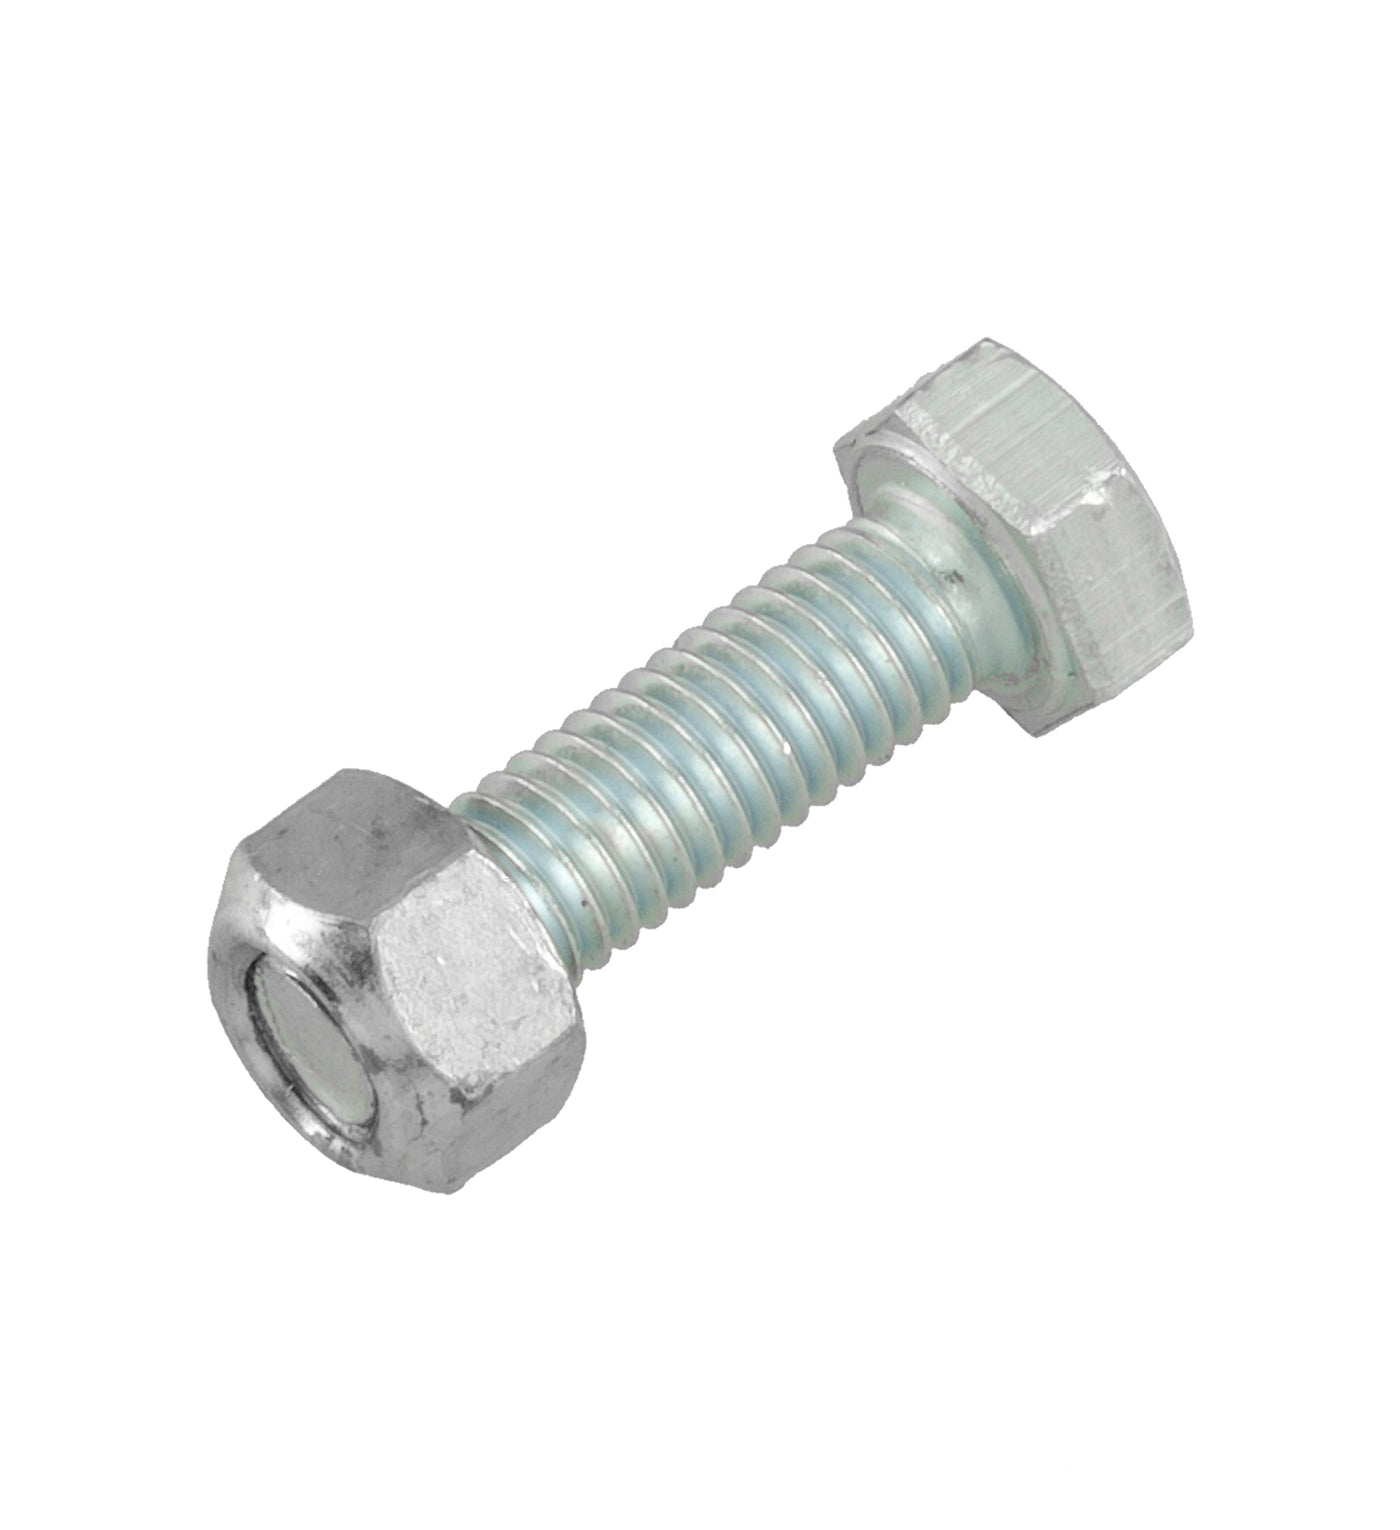 Replacement anvil screw set for the LO 3105 and 3305, and 3805 Anvil Cutters, 3104, 3104/HU, 3304 and 3804 Mitre Cutters, 3106, 3106/HU and 3306 Slat Cutters, 3204/P90, 3204/16u19, 3204/20u25 and 3704/20u25 Tube and Hose Cutters, 3604 and 3606 Cable Duct Cutters, and 3806 Flat Ribbon Cable Cutters